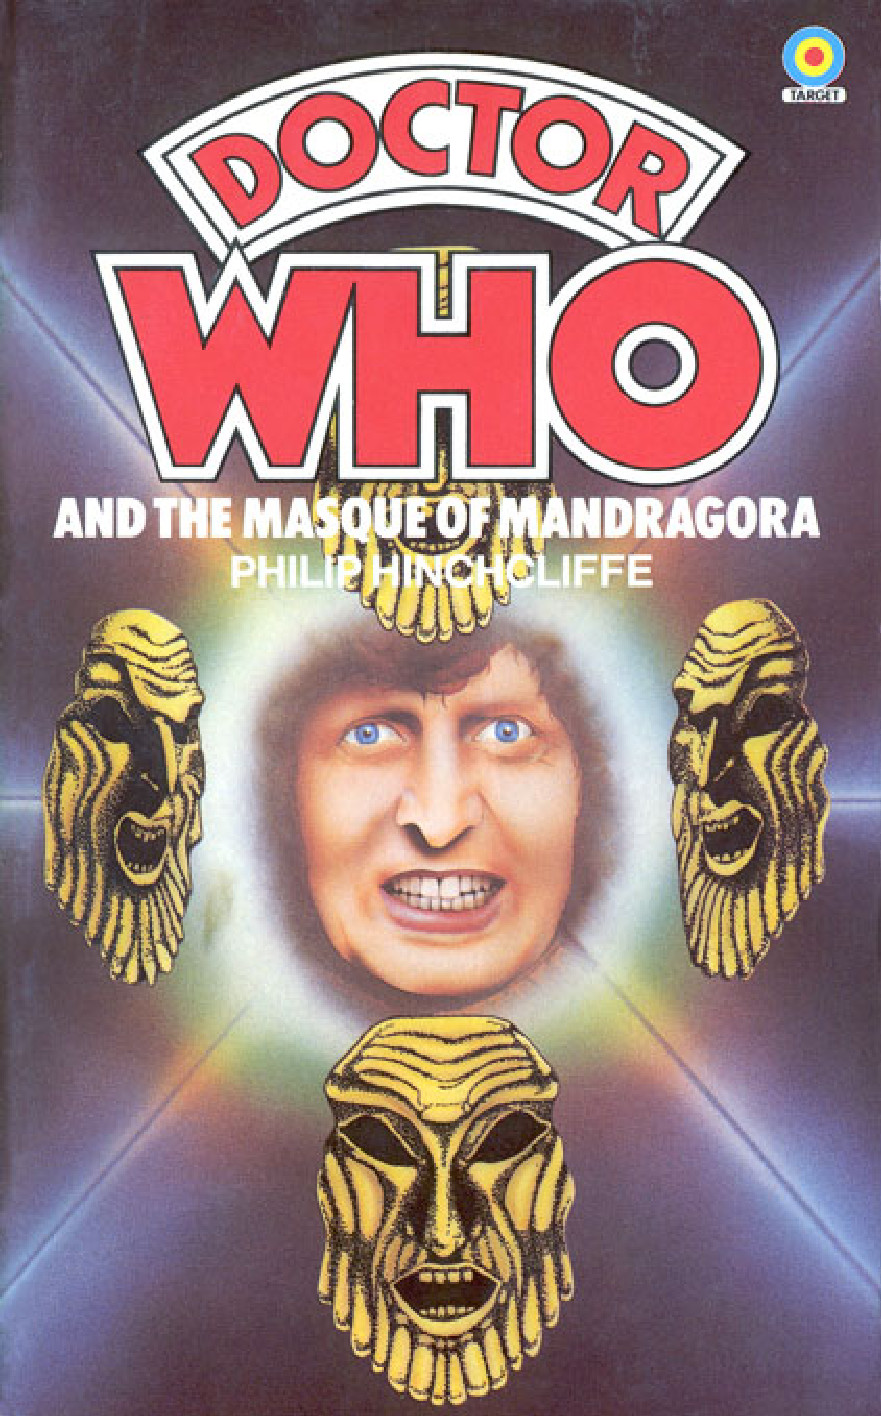 Doctor Who: The Masque of the Mandragora